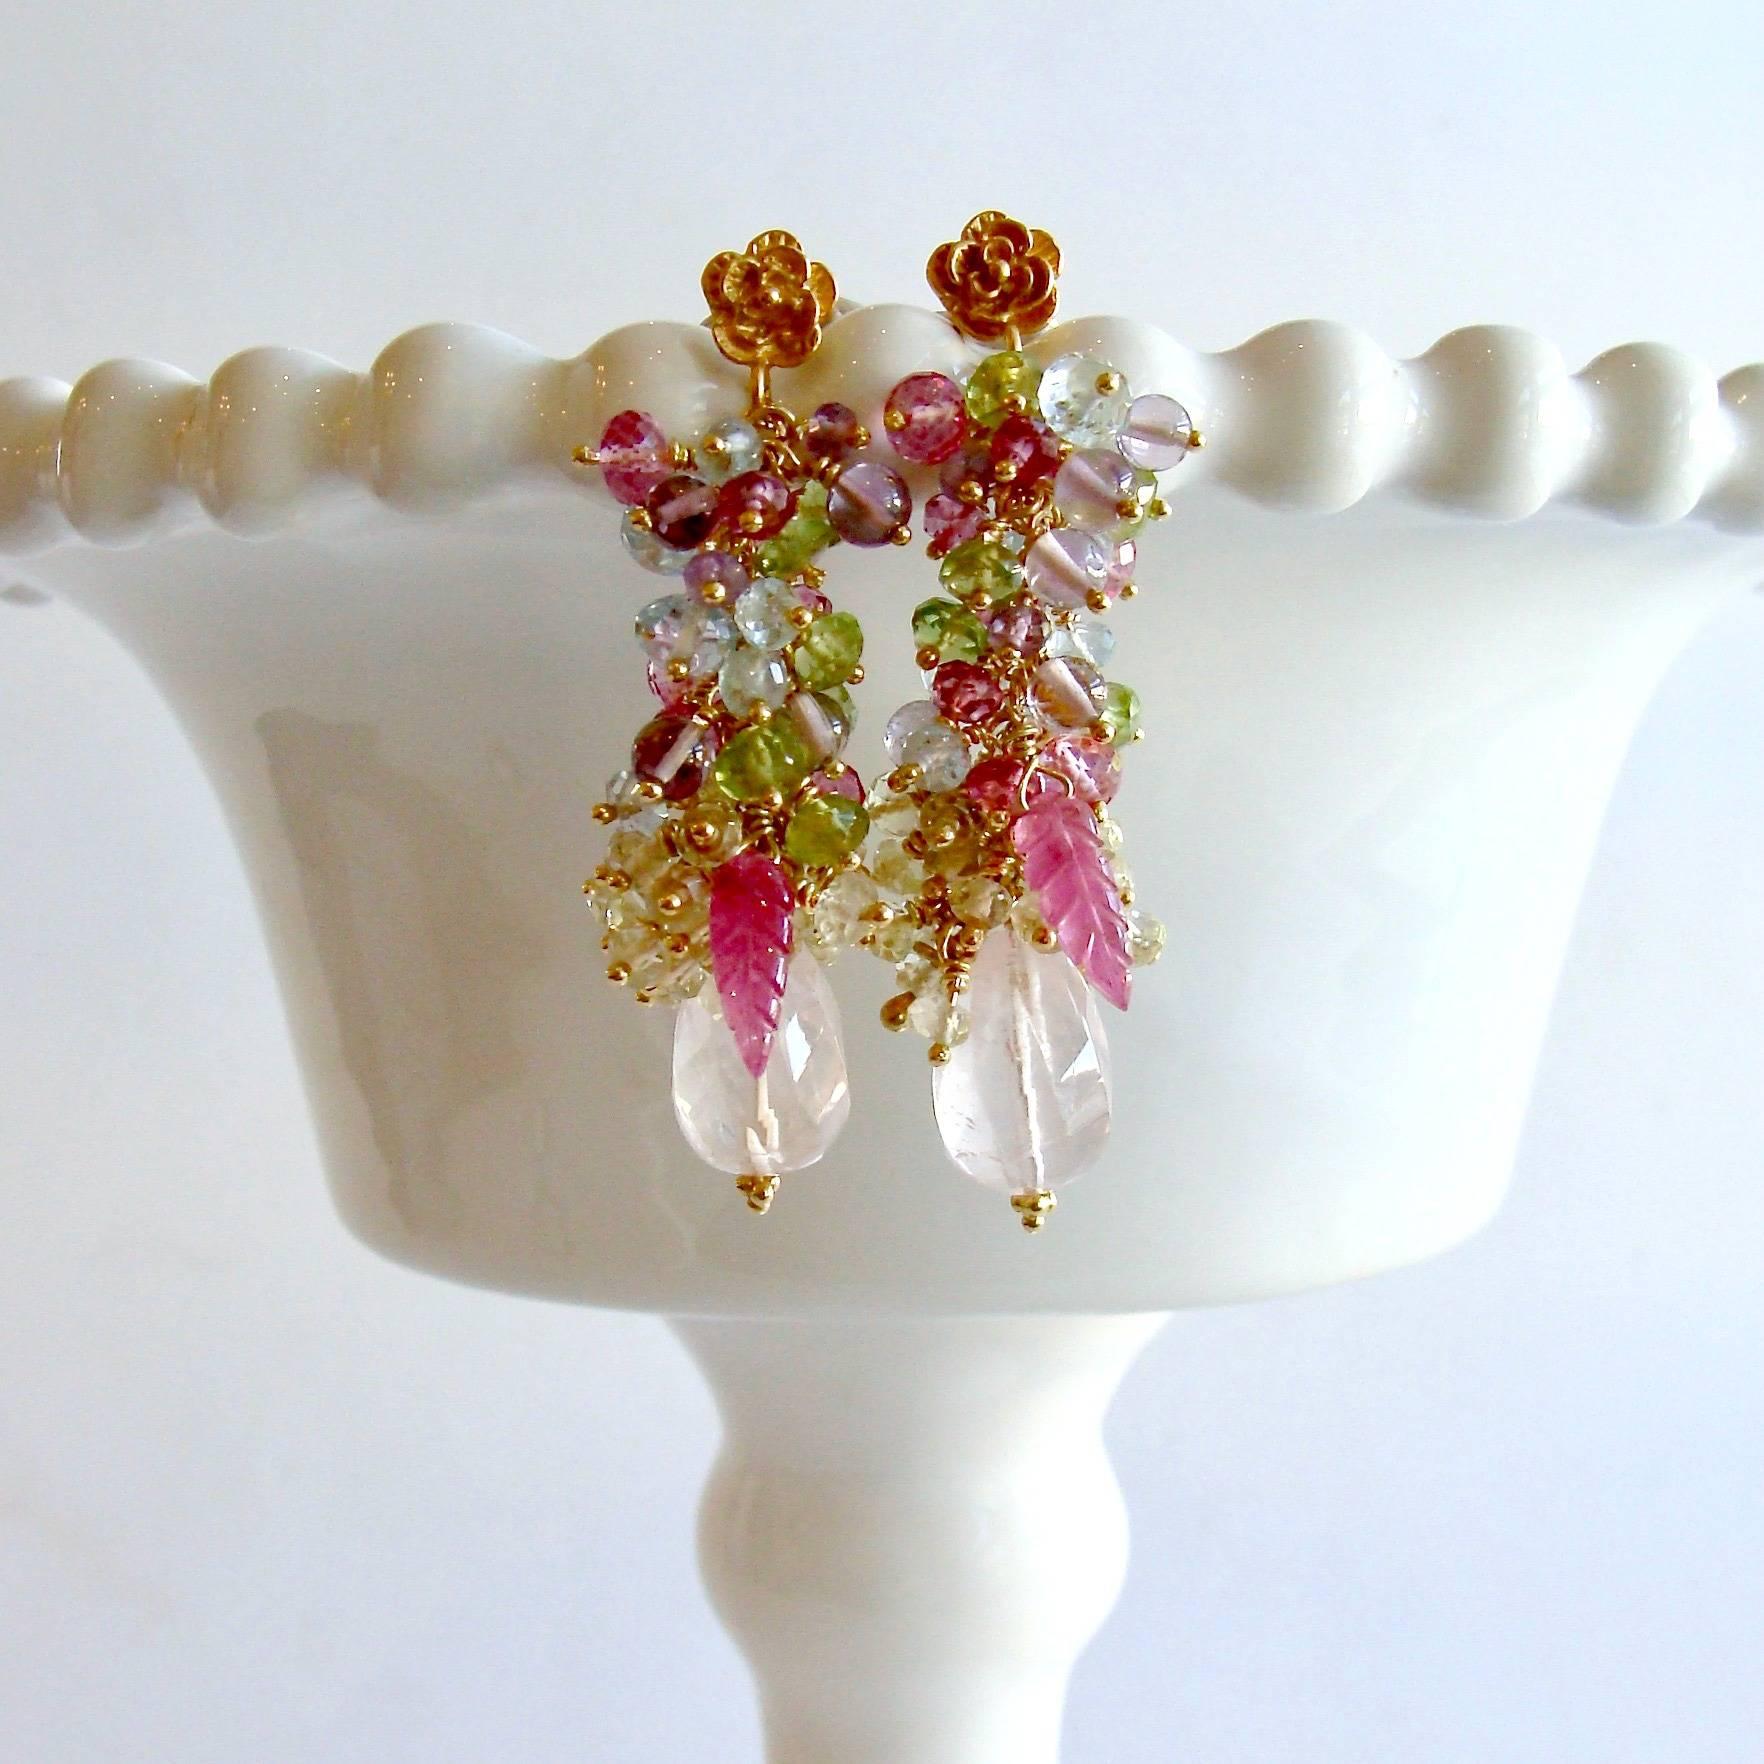 Fleur III Earrings.

After a harsh and cold winter, everyone is ready for the happy colors of spring and these stunning cluster drop earrings don’t disappoint.  A cacophony of spring colors mimics the beautiful colors of a spring garden for a